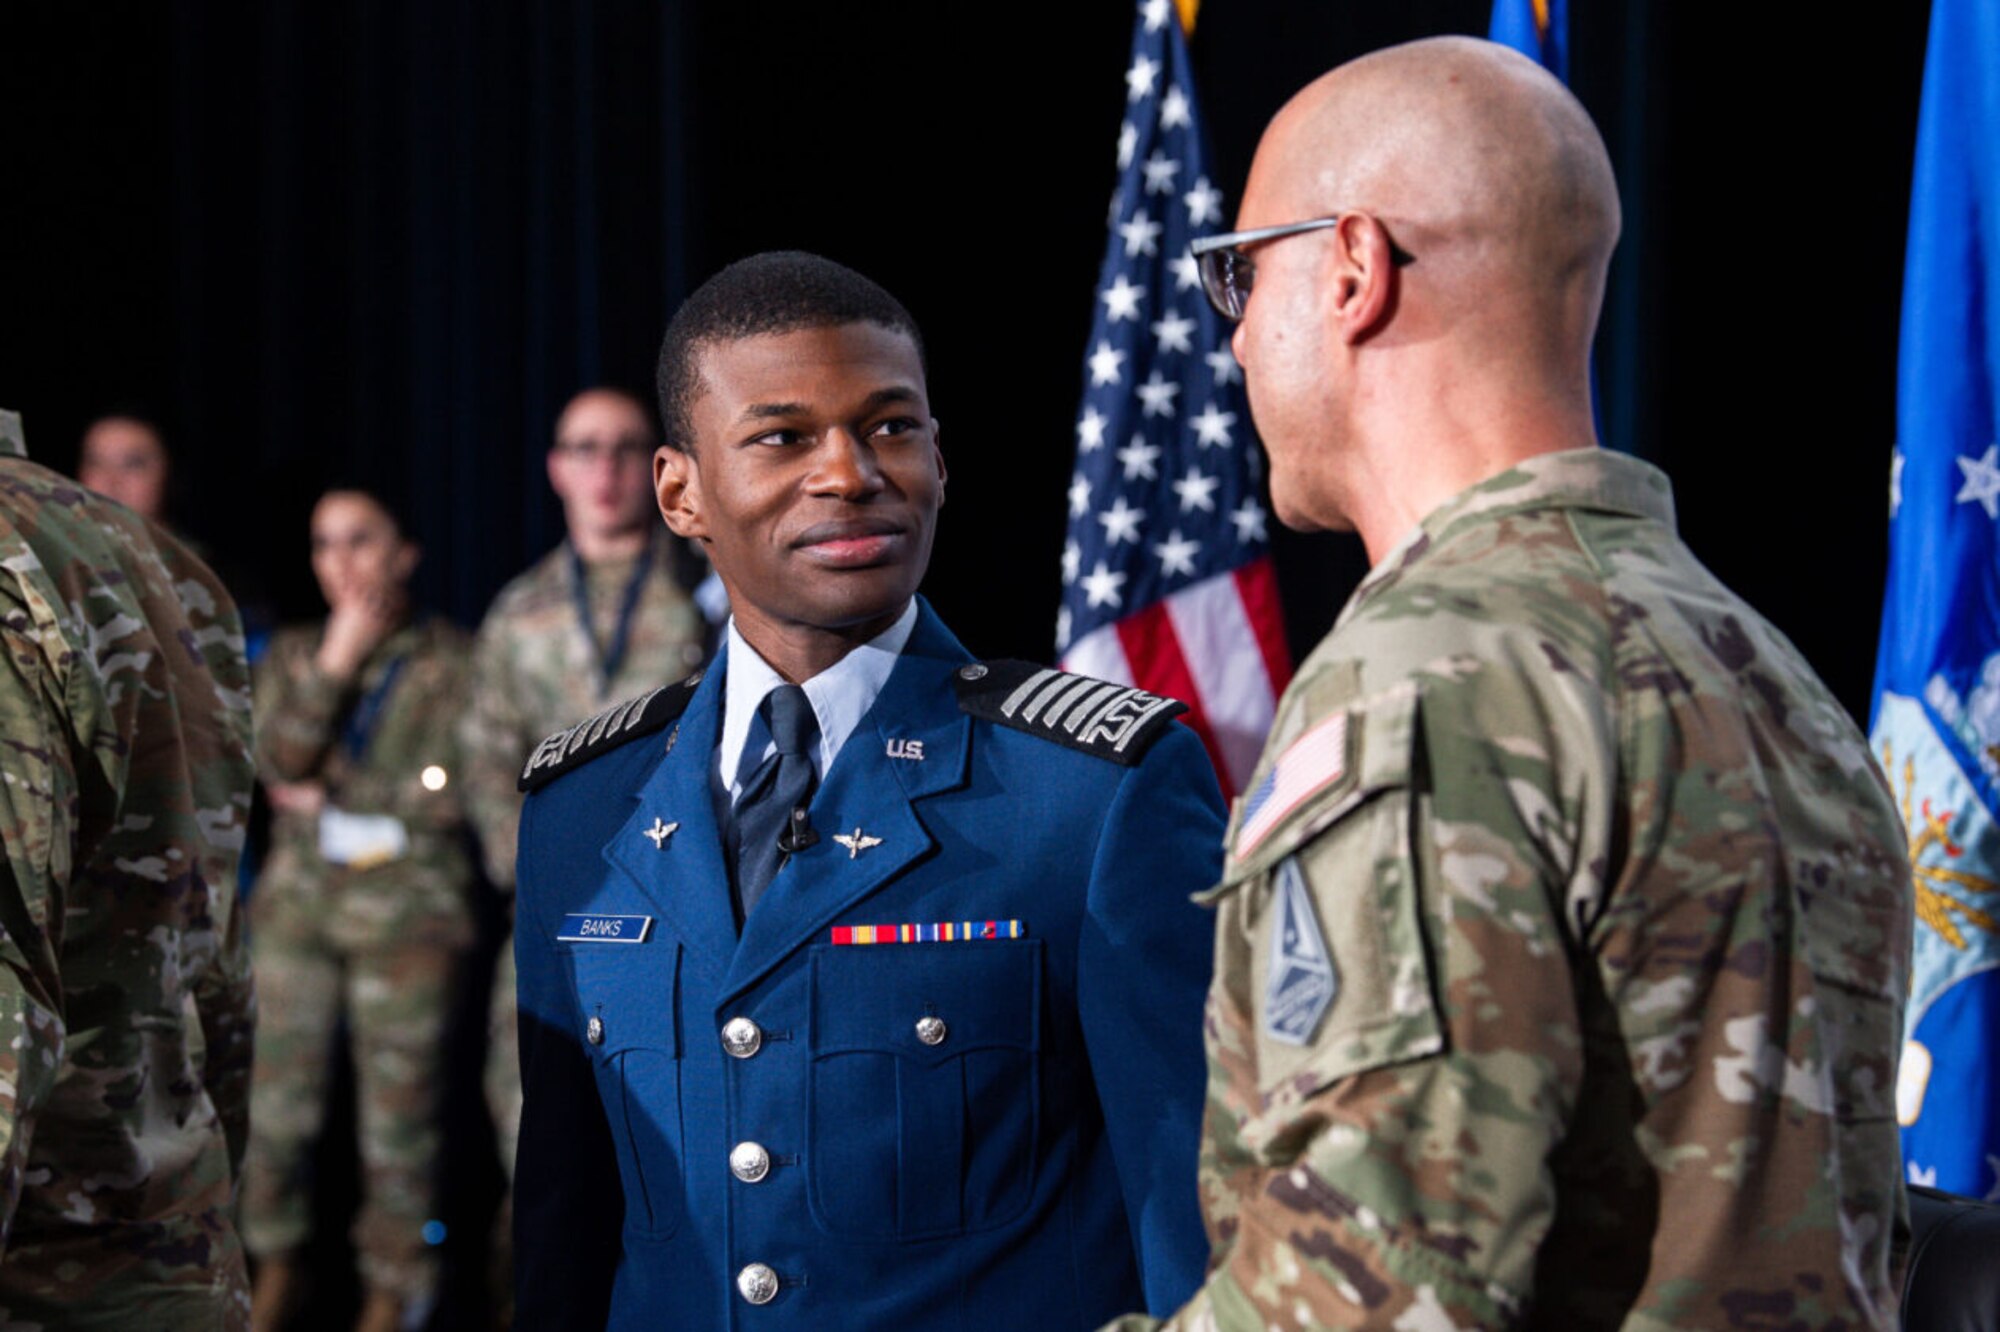 Cadet 1st Class Ruben Banks speaks with Chief Master Sgt. Of the Space Force John Bentivegna